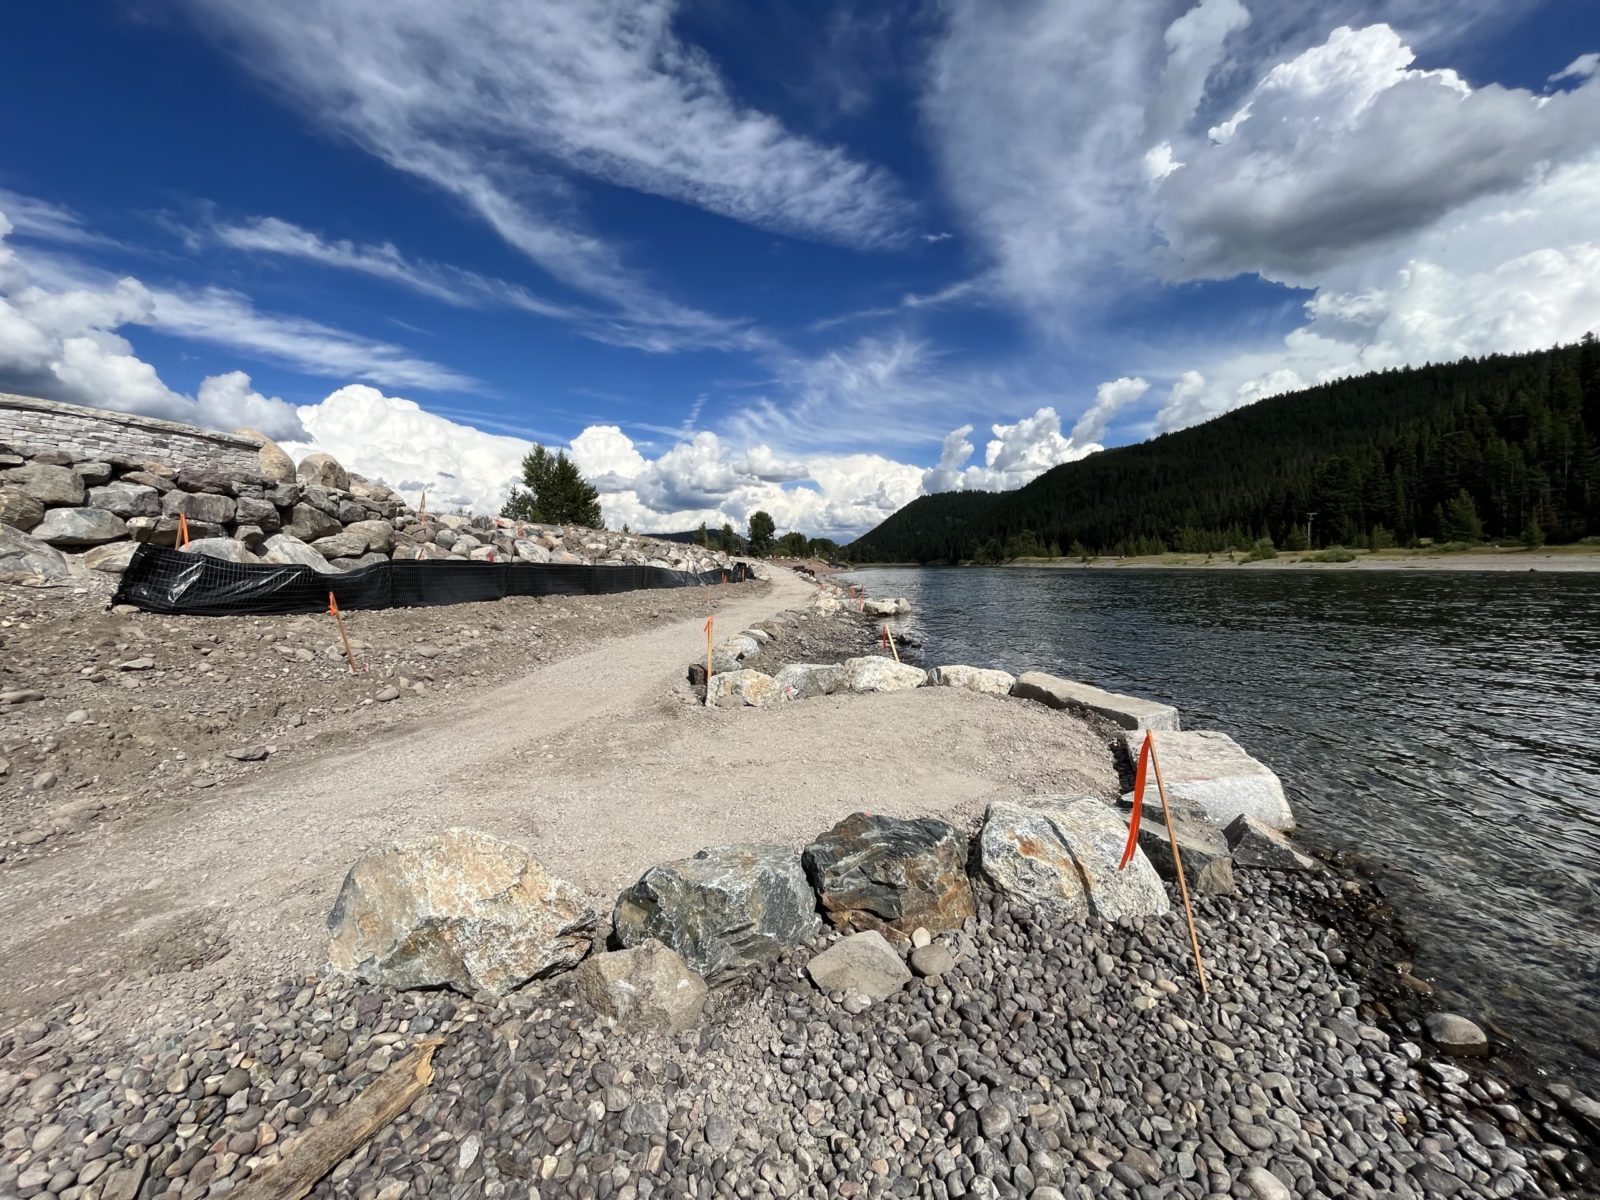 The accessible pathway leads visitors of all abilities to the water's edge and new fishing platforms will provide the opportunity for people in wheel chairs to cast a line on the Snake River.